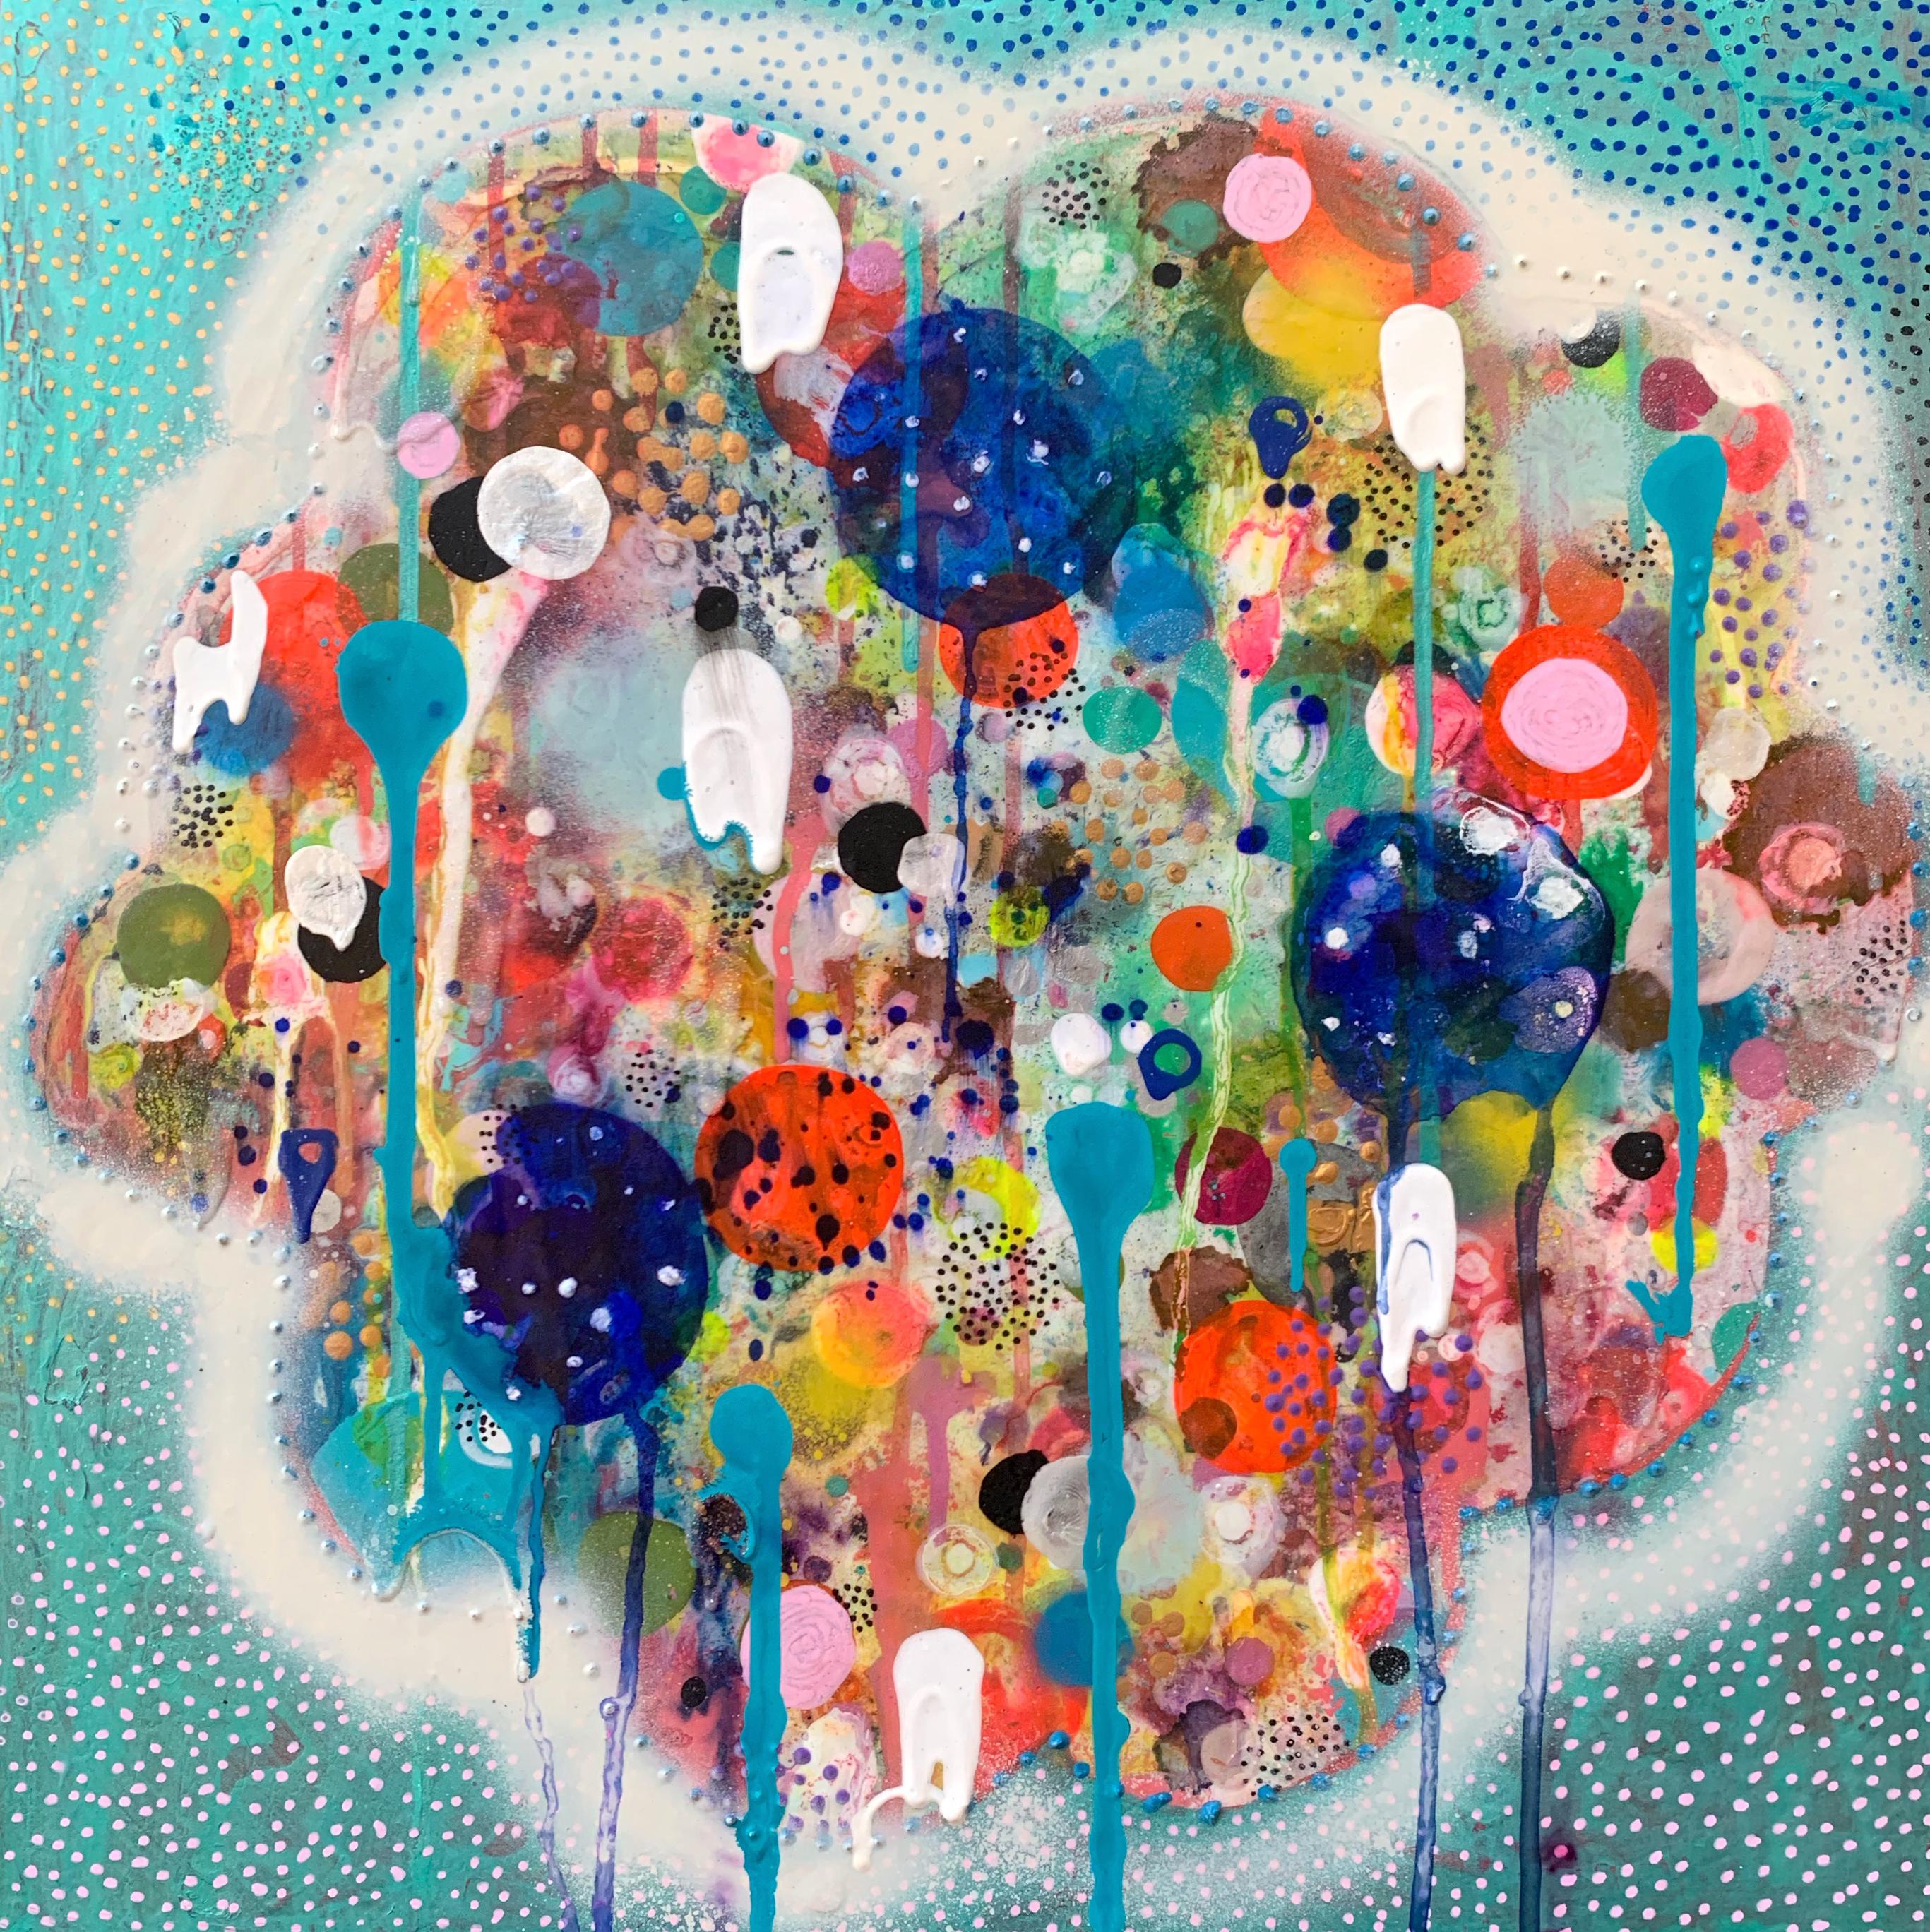 Abstract, Colorful Mixed Media Painting by Liz Tran 'Puff'